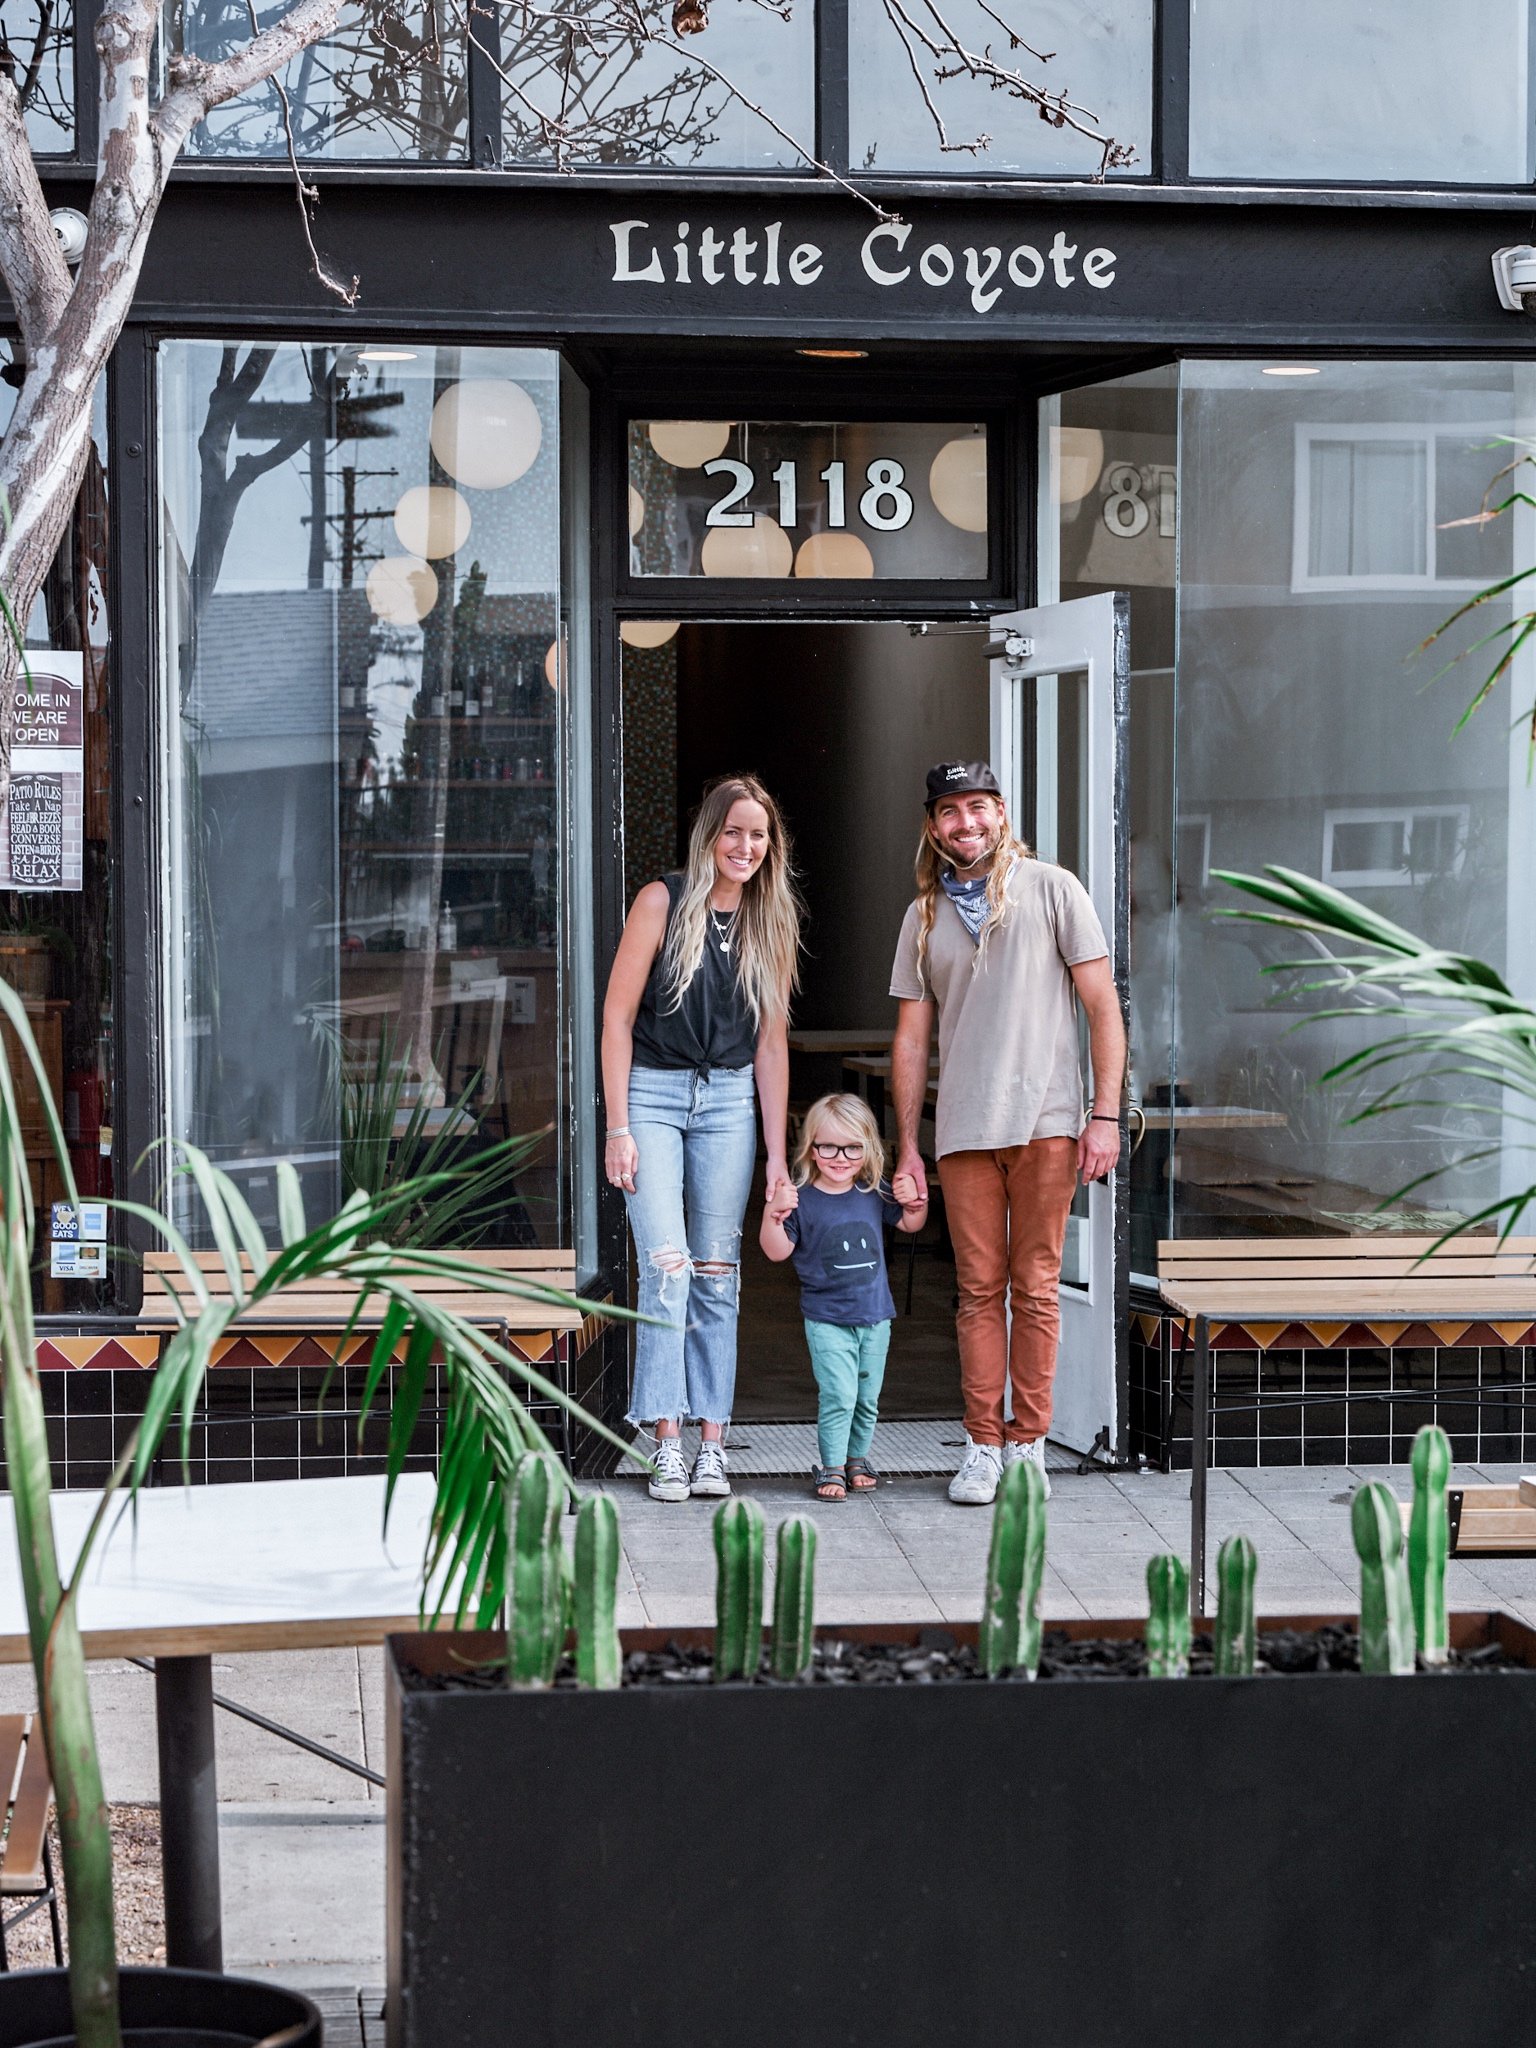 Laura, Jonathan and Coyote Strader, owners of Little Coyote Pizza